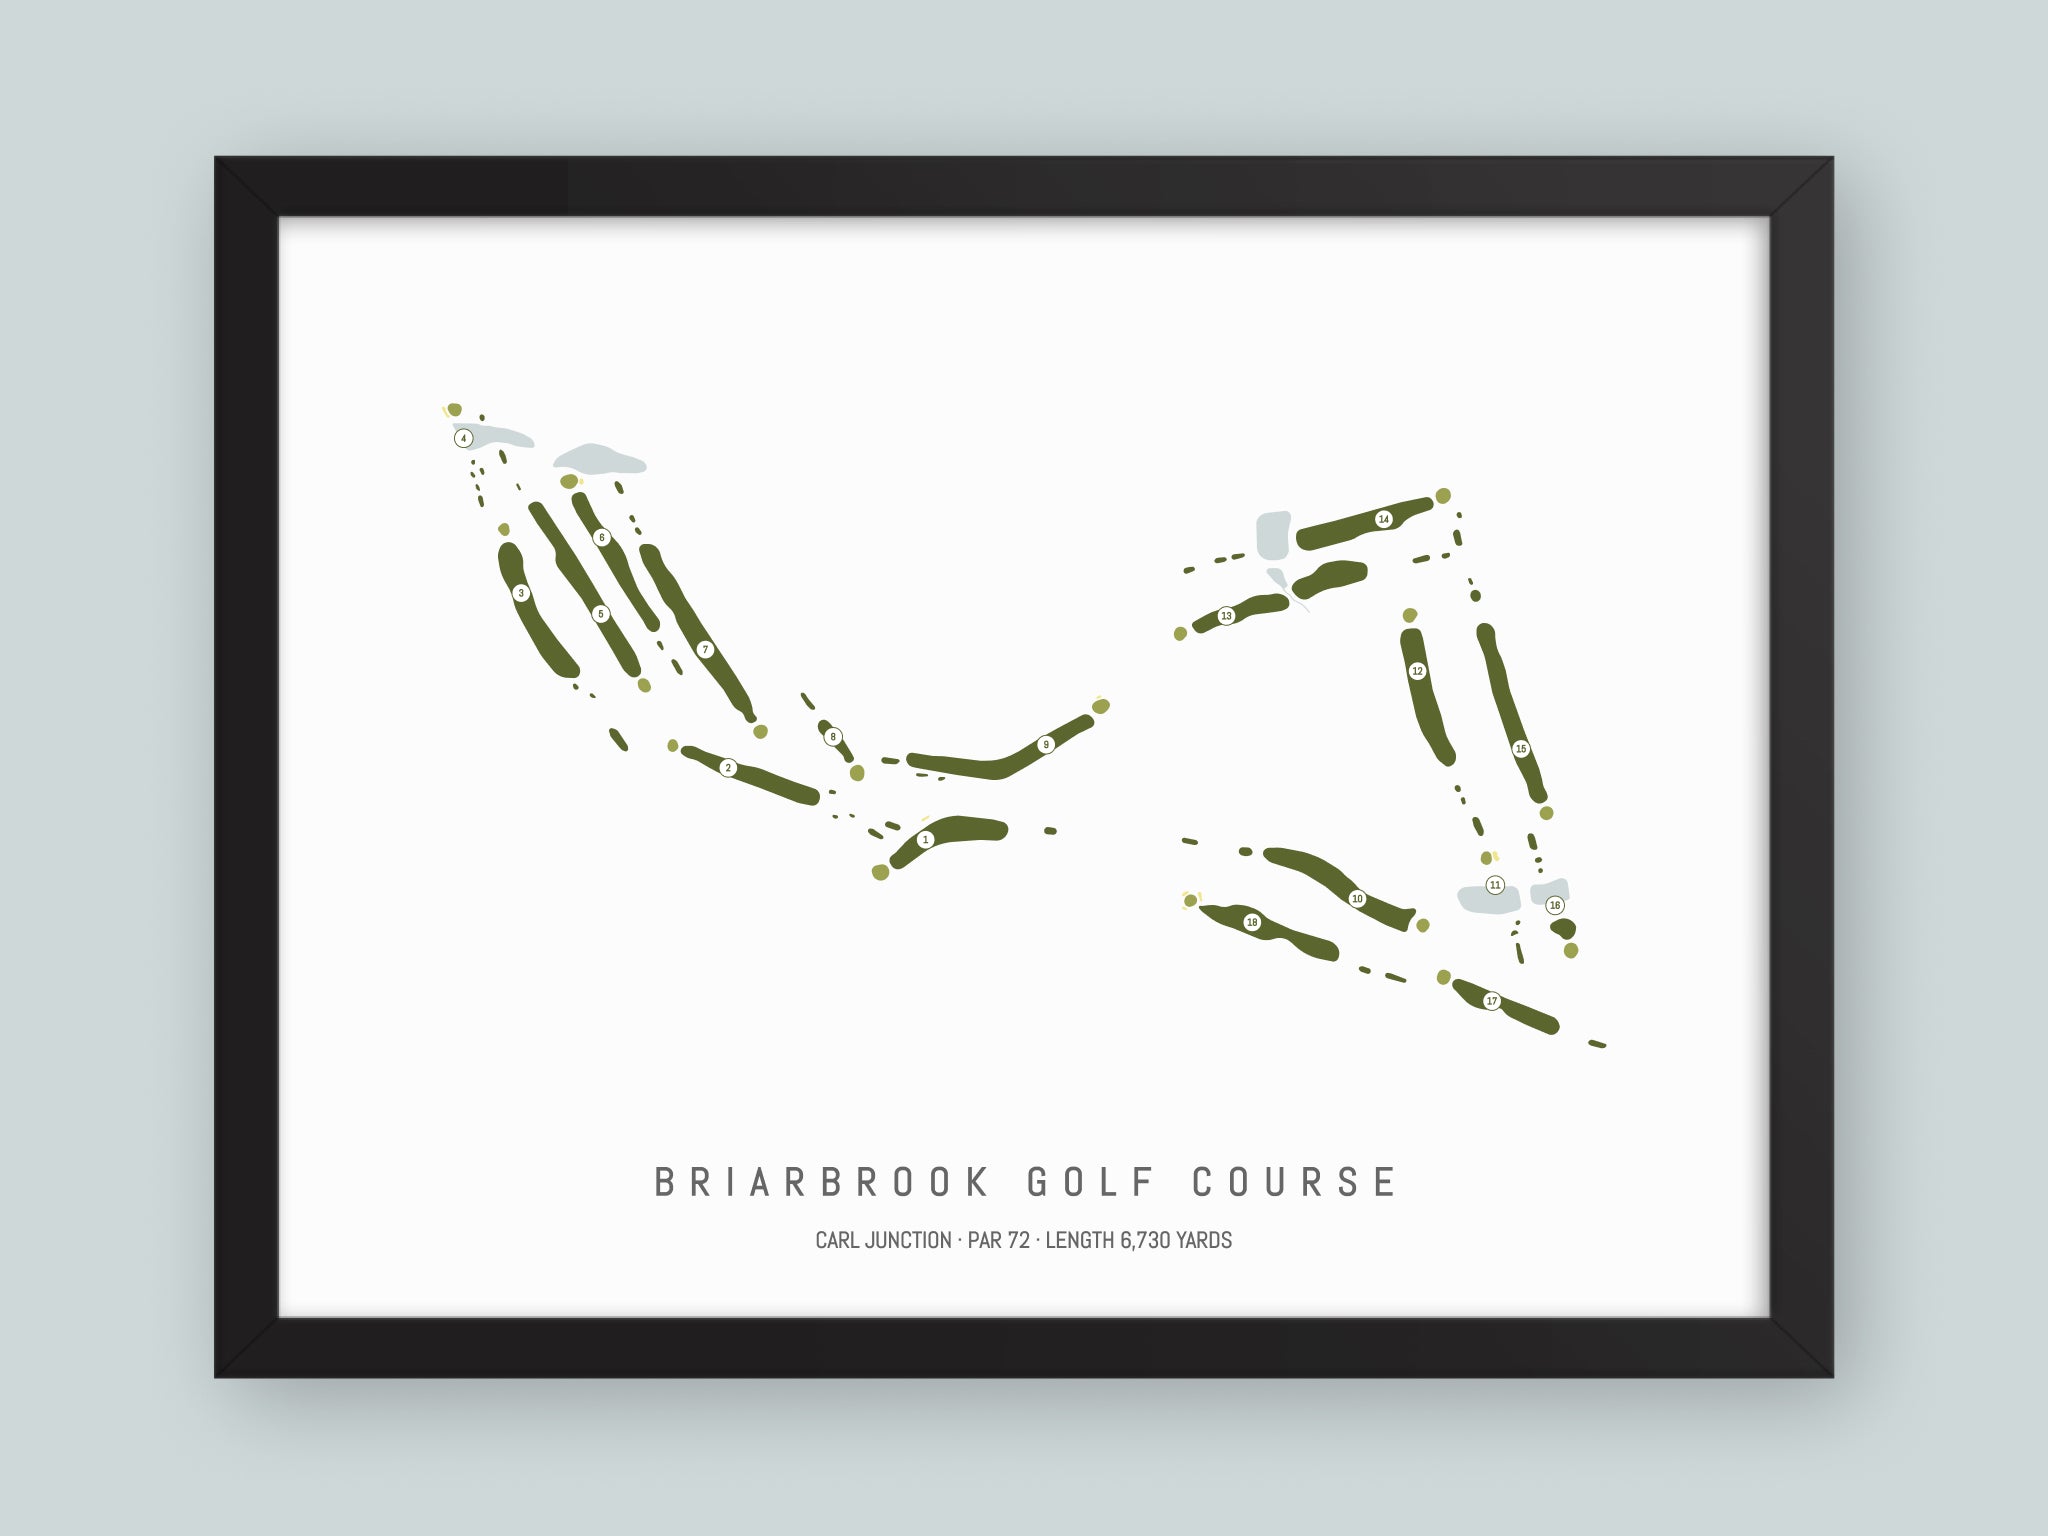 Briarbrook-Golf-Course-MO--Black-Frame-24x18-With-Hole-Numbers